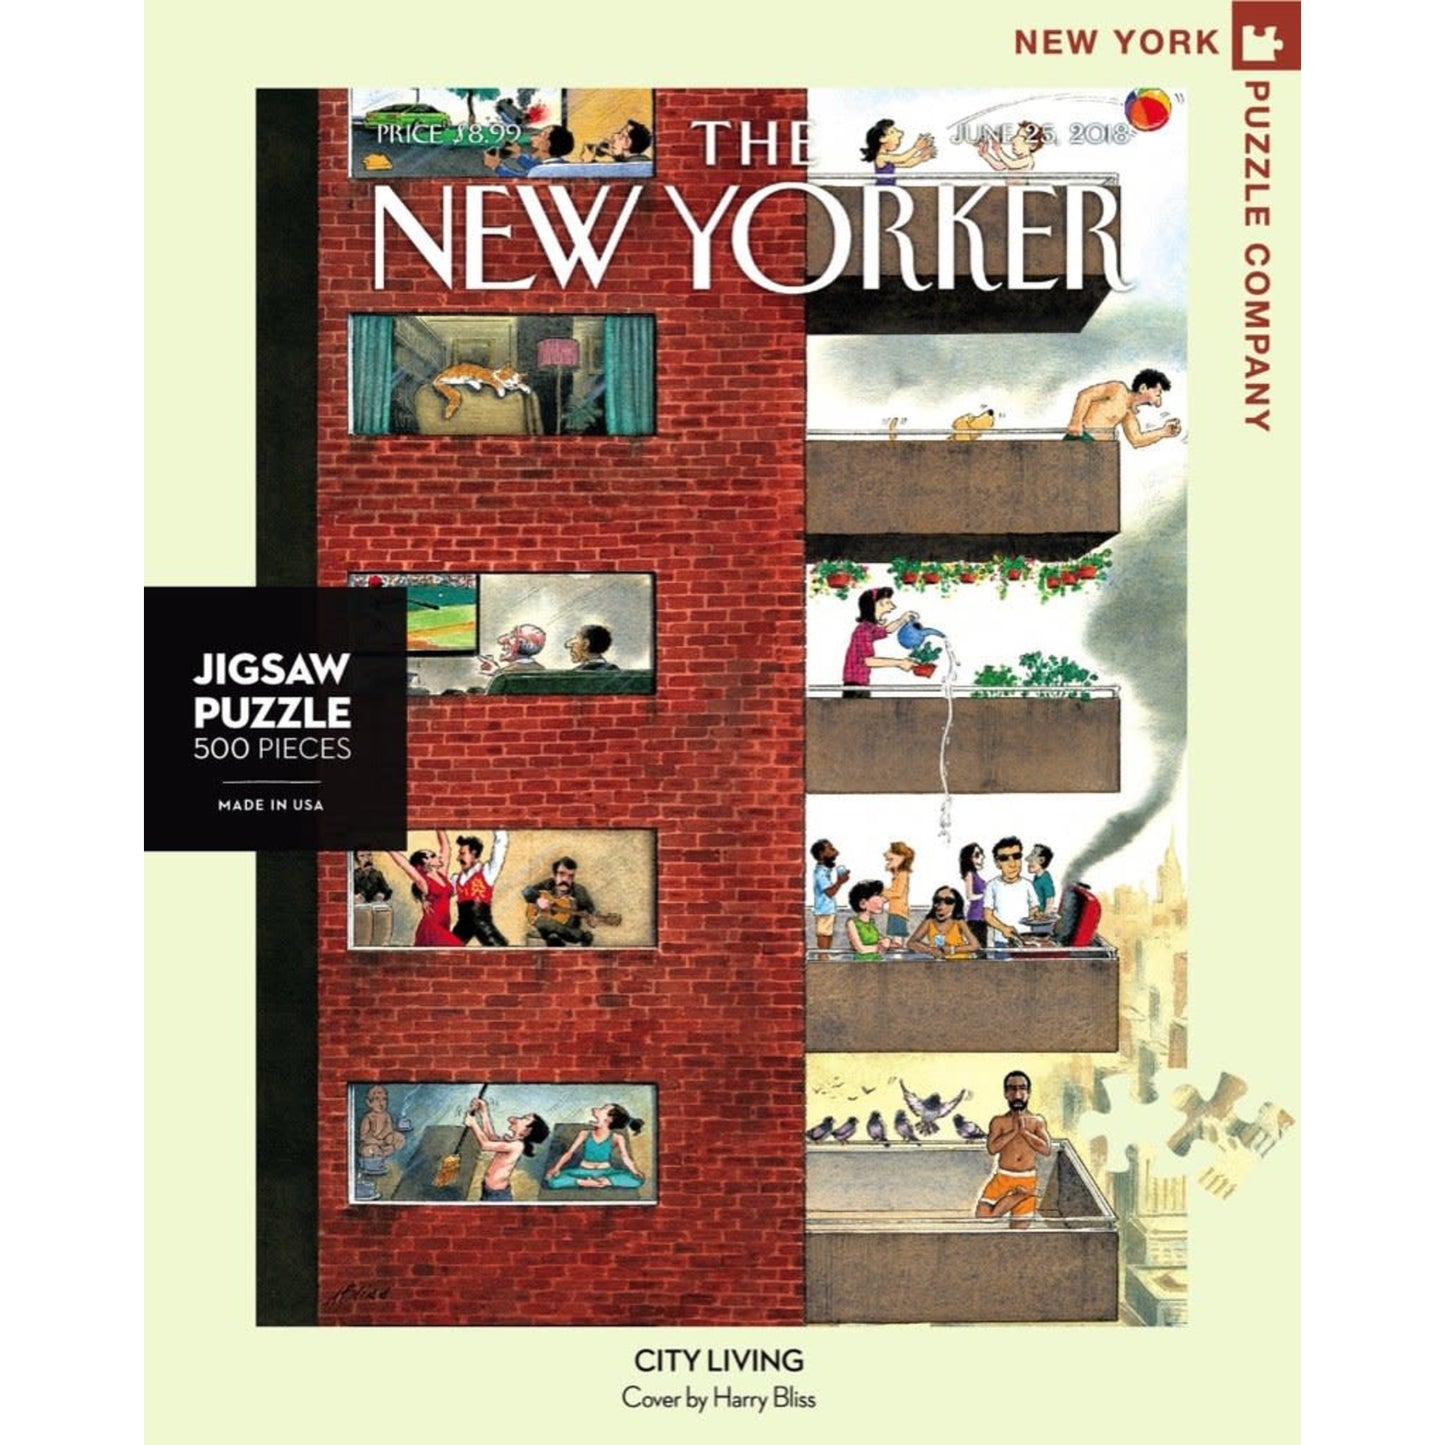 The New Yorker, City Living Puzzle